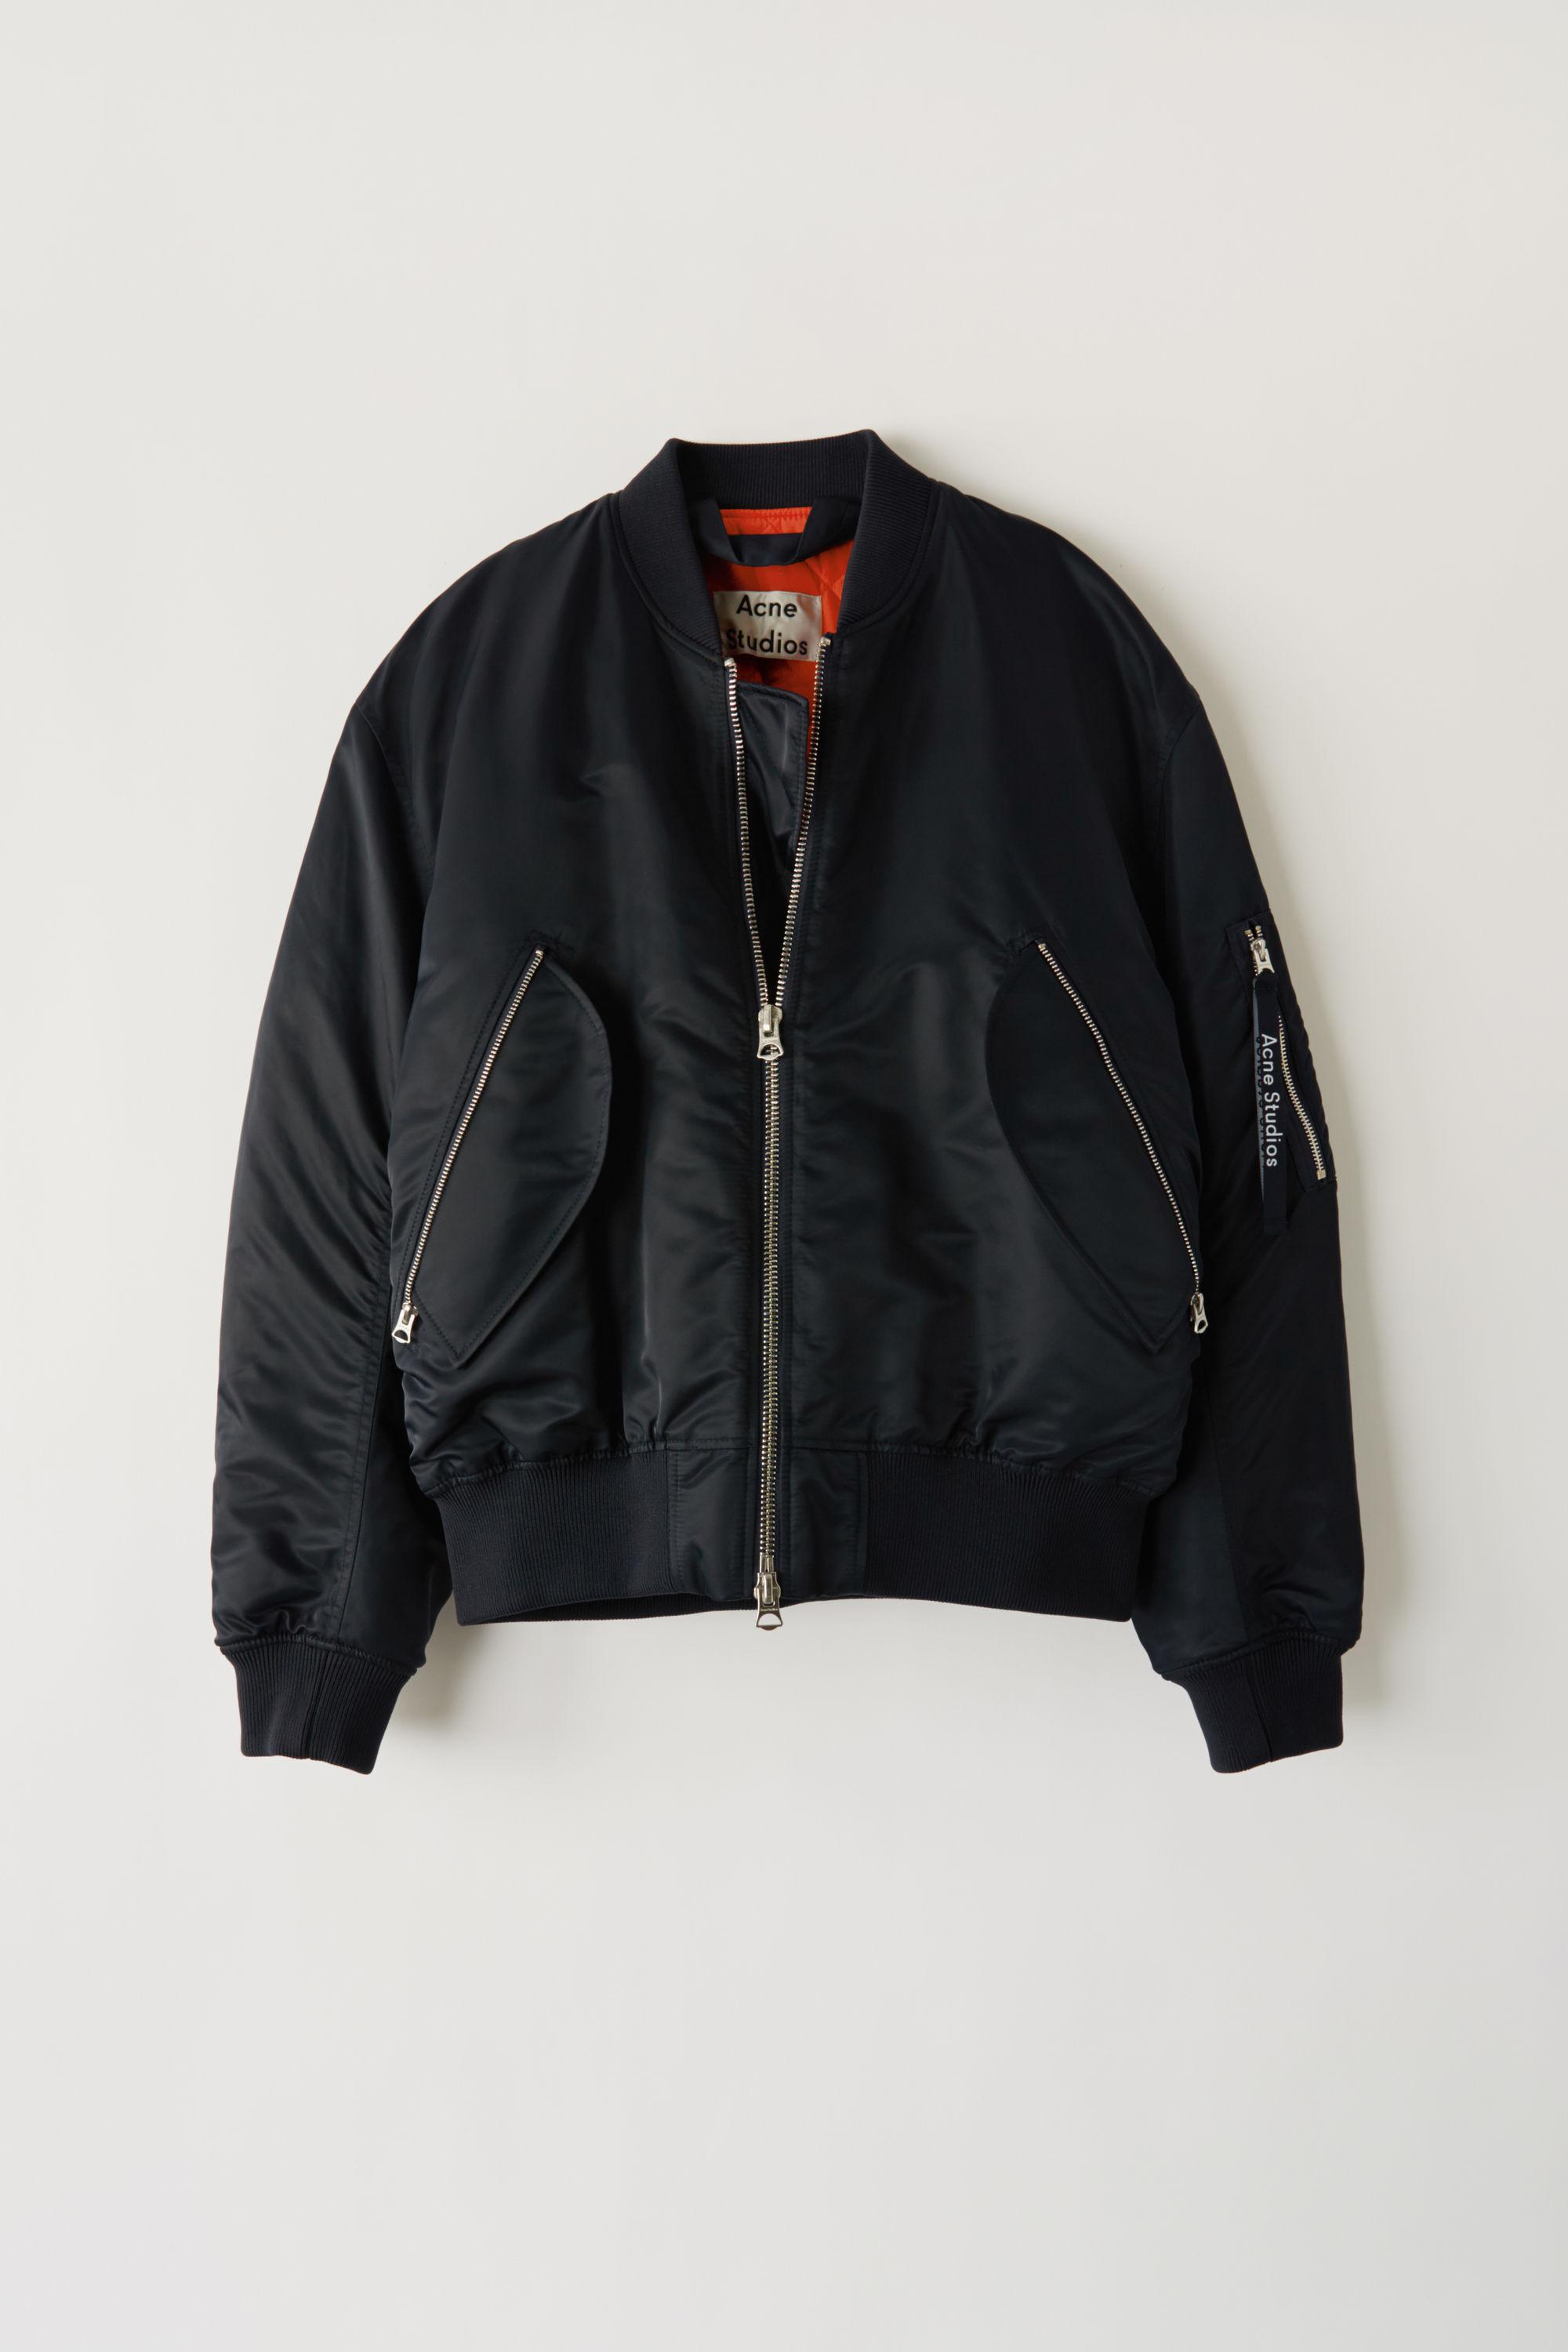 Acne Studios Synthetic Makio Black Bomber Jacket for Men - Save 9% - Lyst